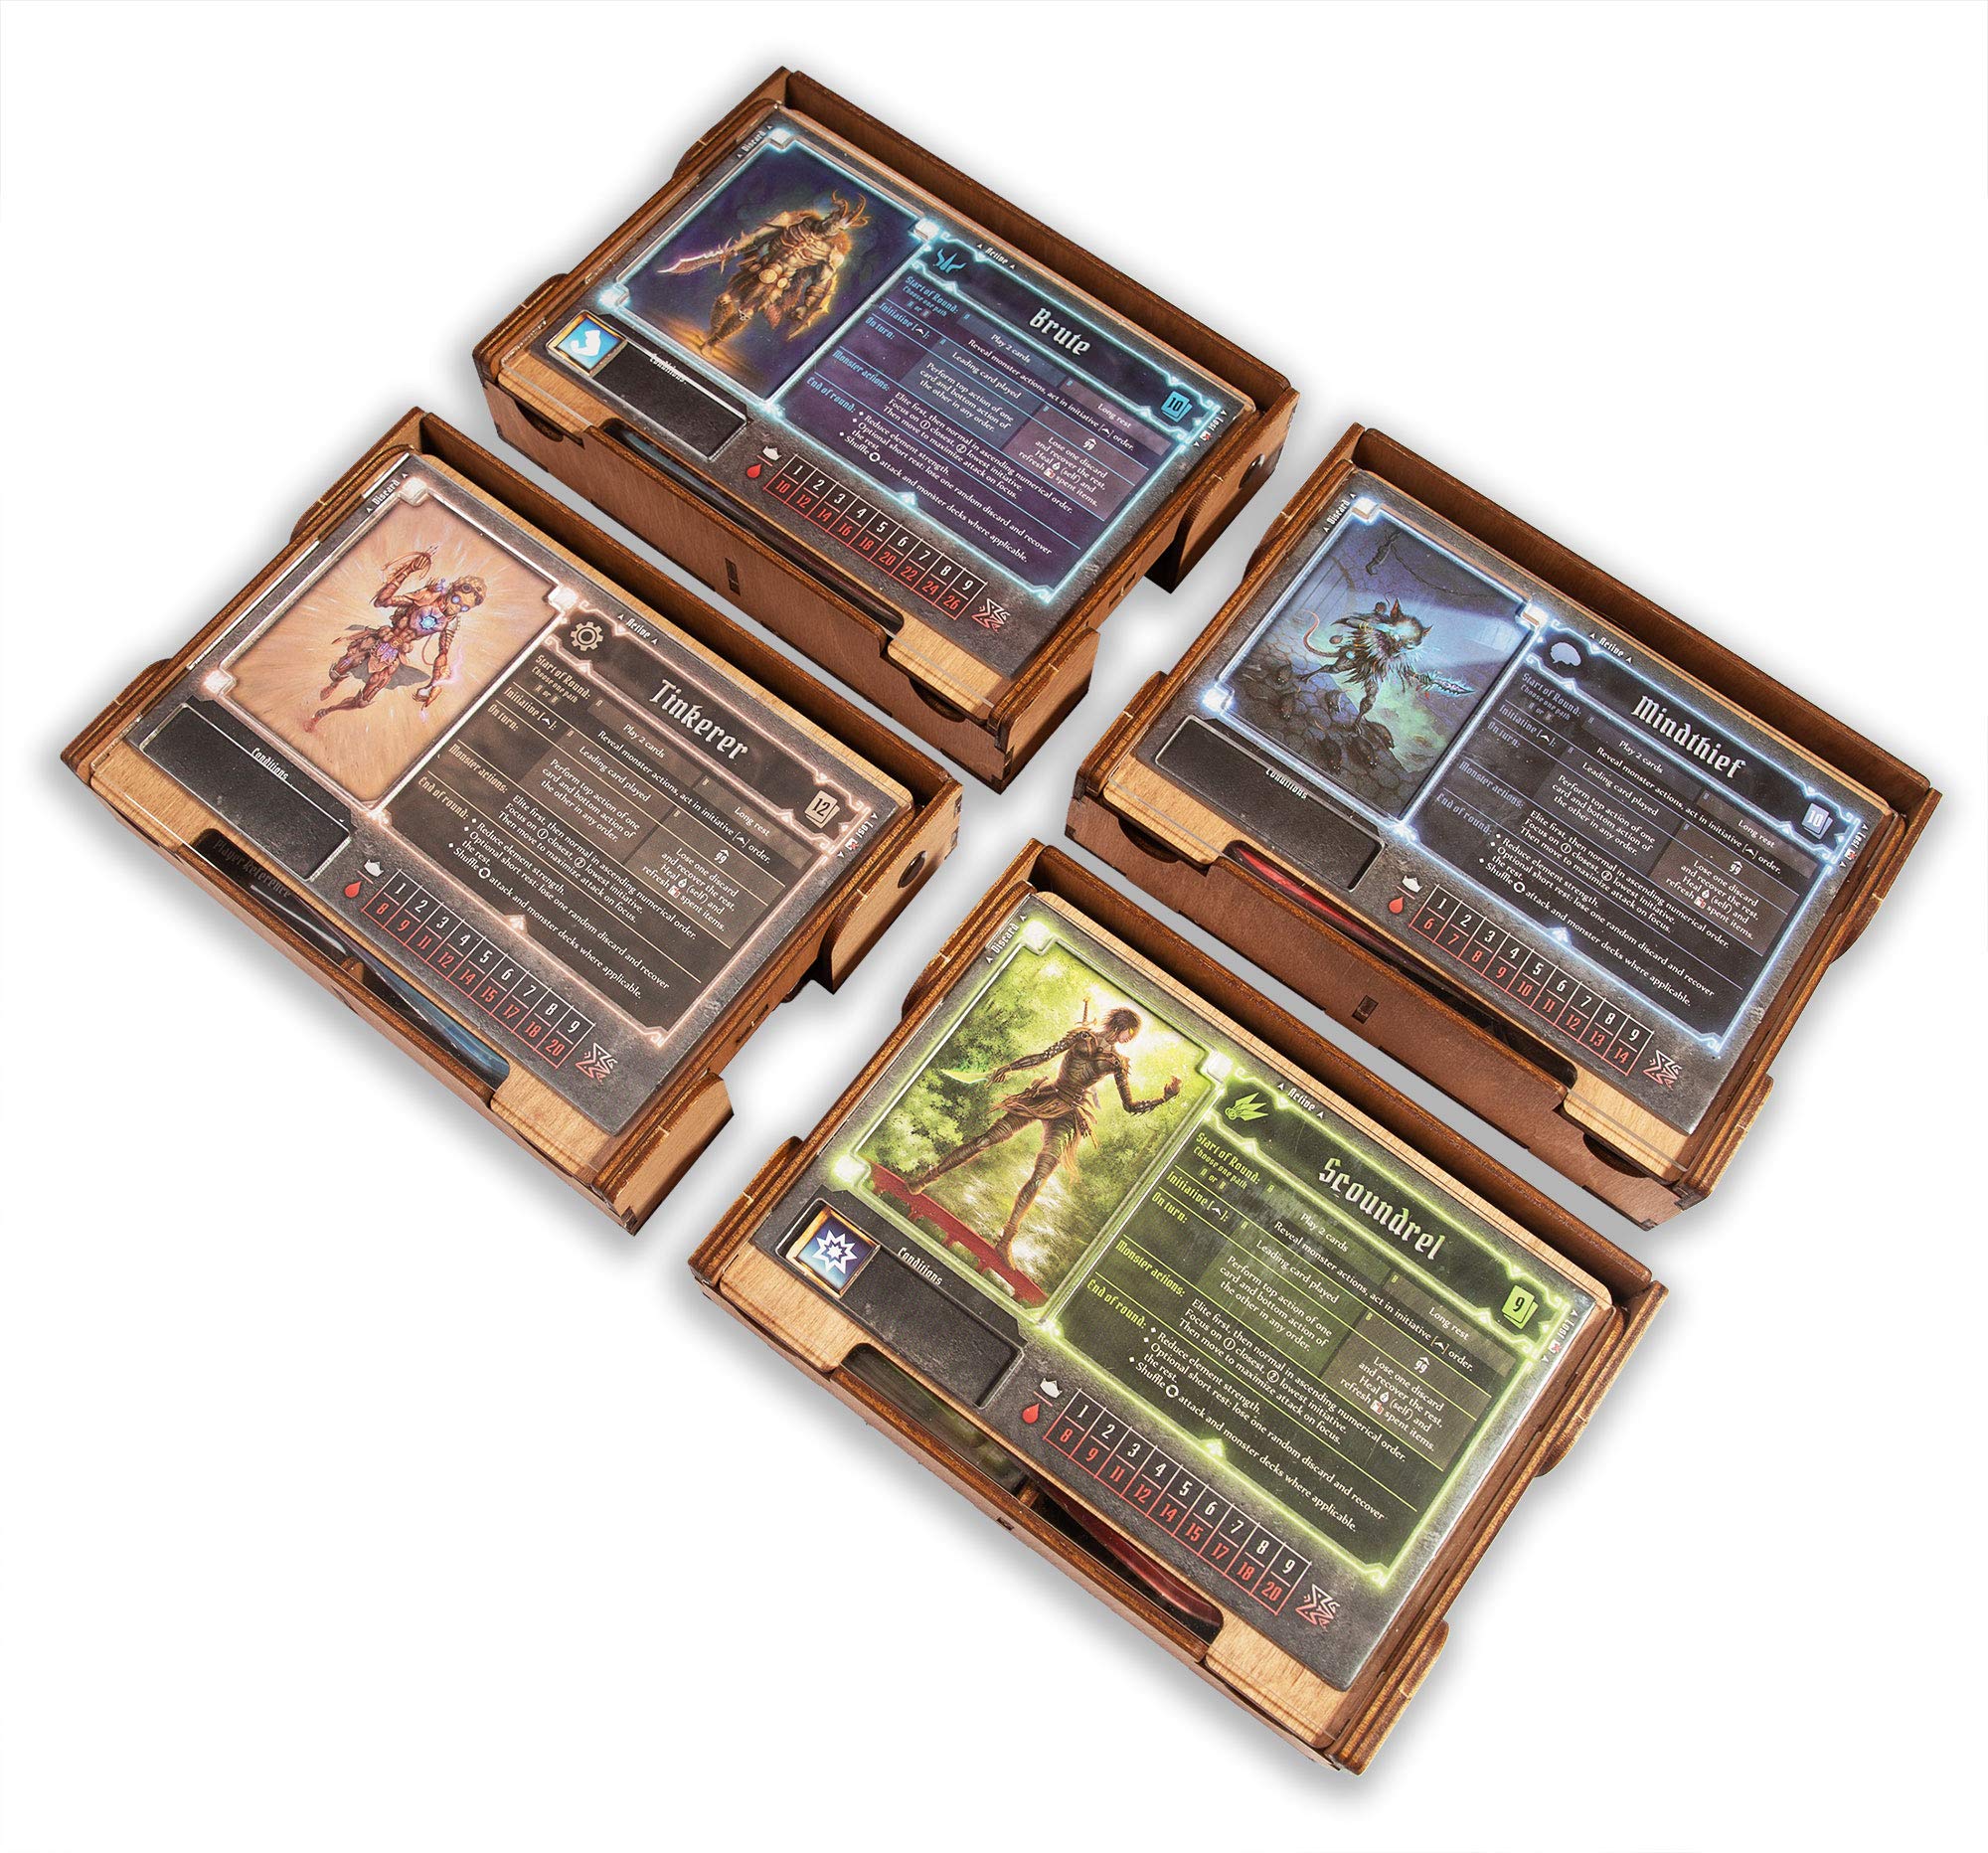 SMONEX Wooden Organizer and Four Player Boards Compatible with Gloomhaven Board Game - Box Suitable for Storage All Gloomhaven Expansions - Insert and Storage